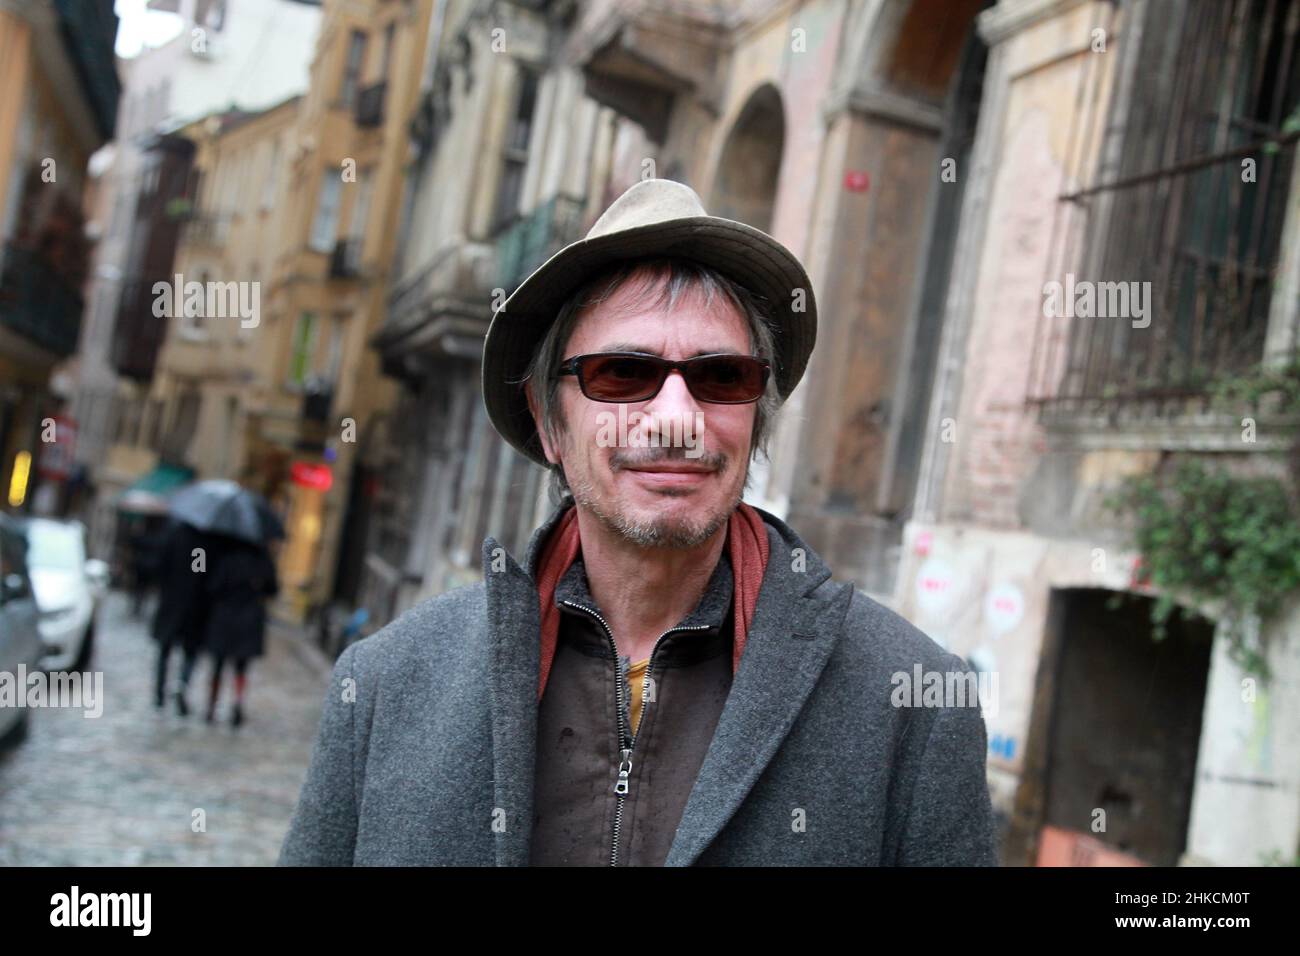 ISTANBUL, TURKEY - FEBRUARY 15: French film director, critic, and writer Alex Christophe Dupont, best known as Leos Carax portrait on February 15, 2013 in Istanbul, Turkey. Stock Photo